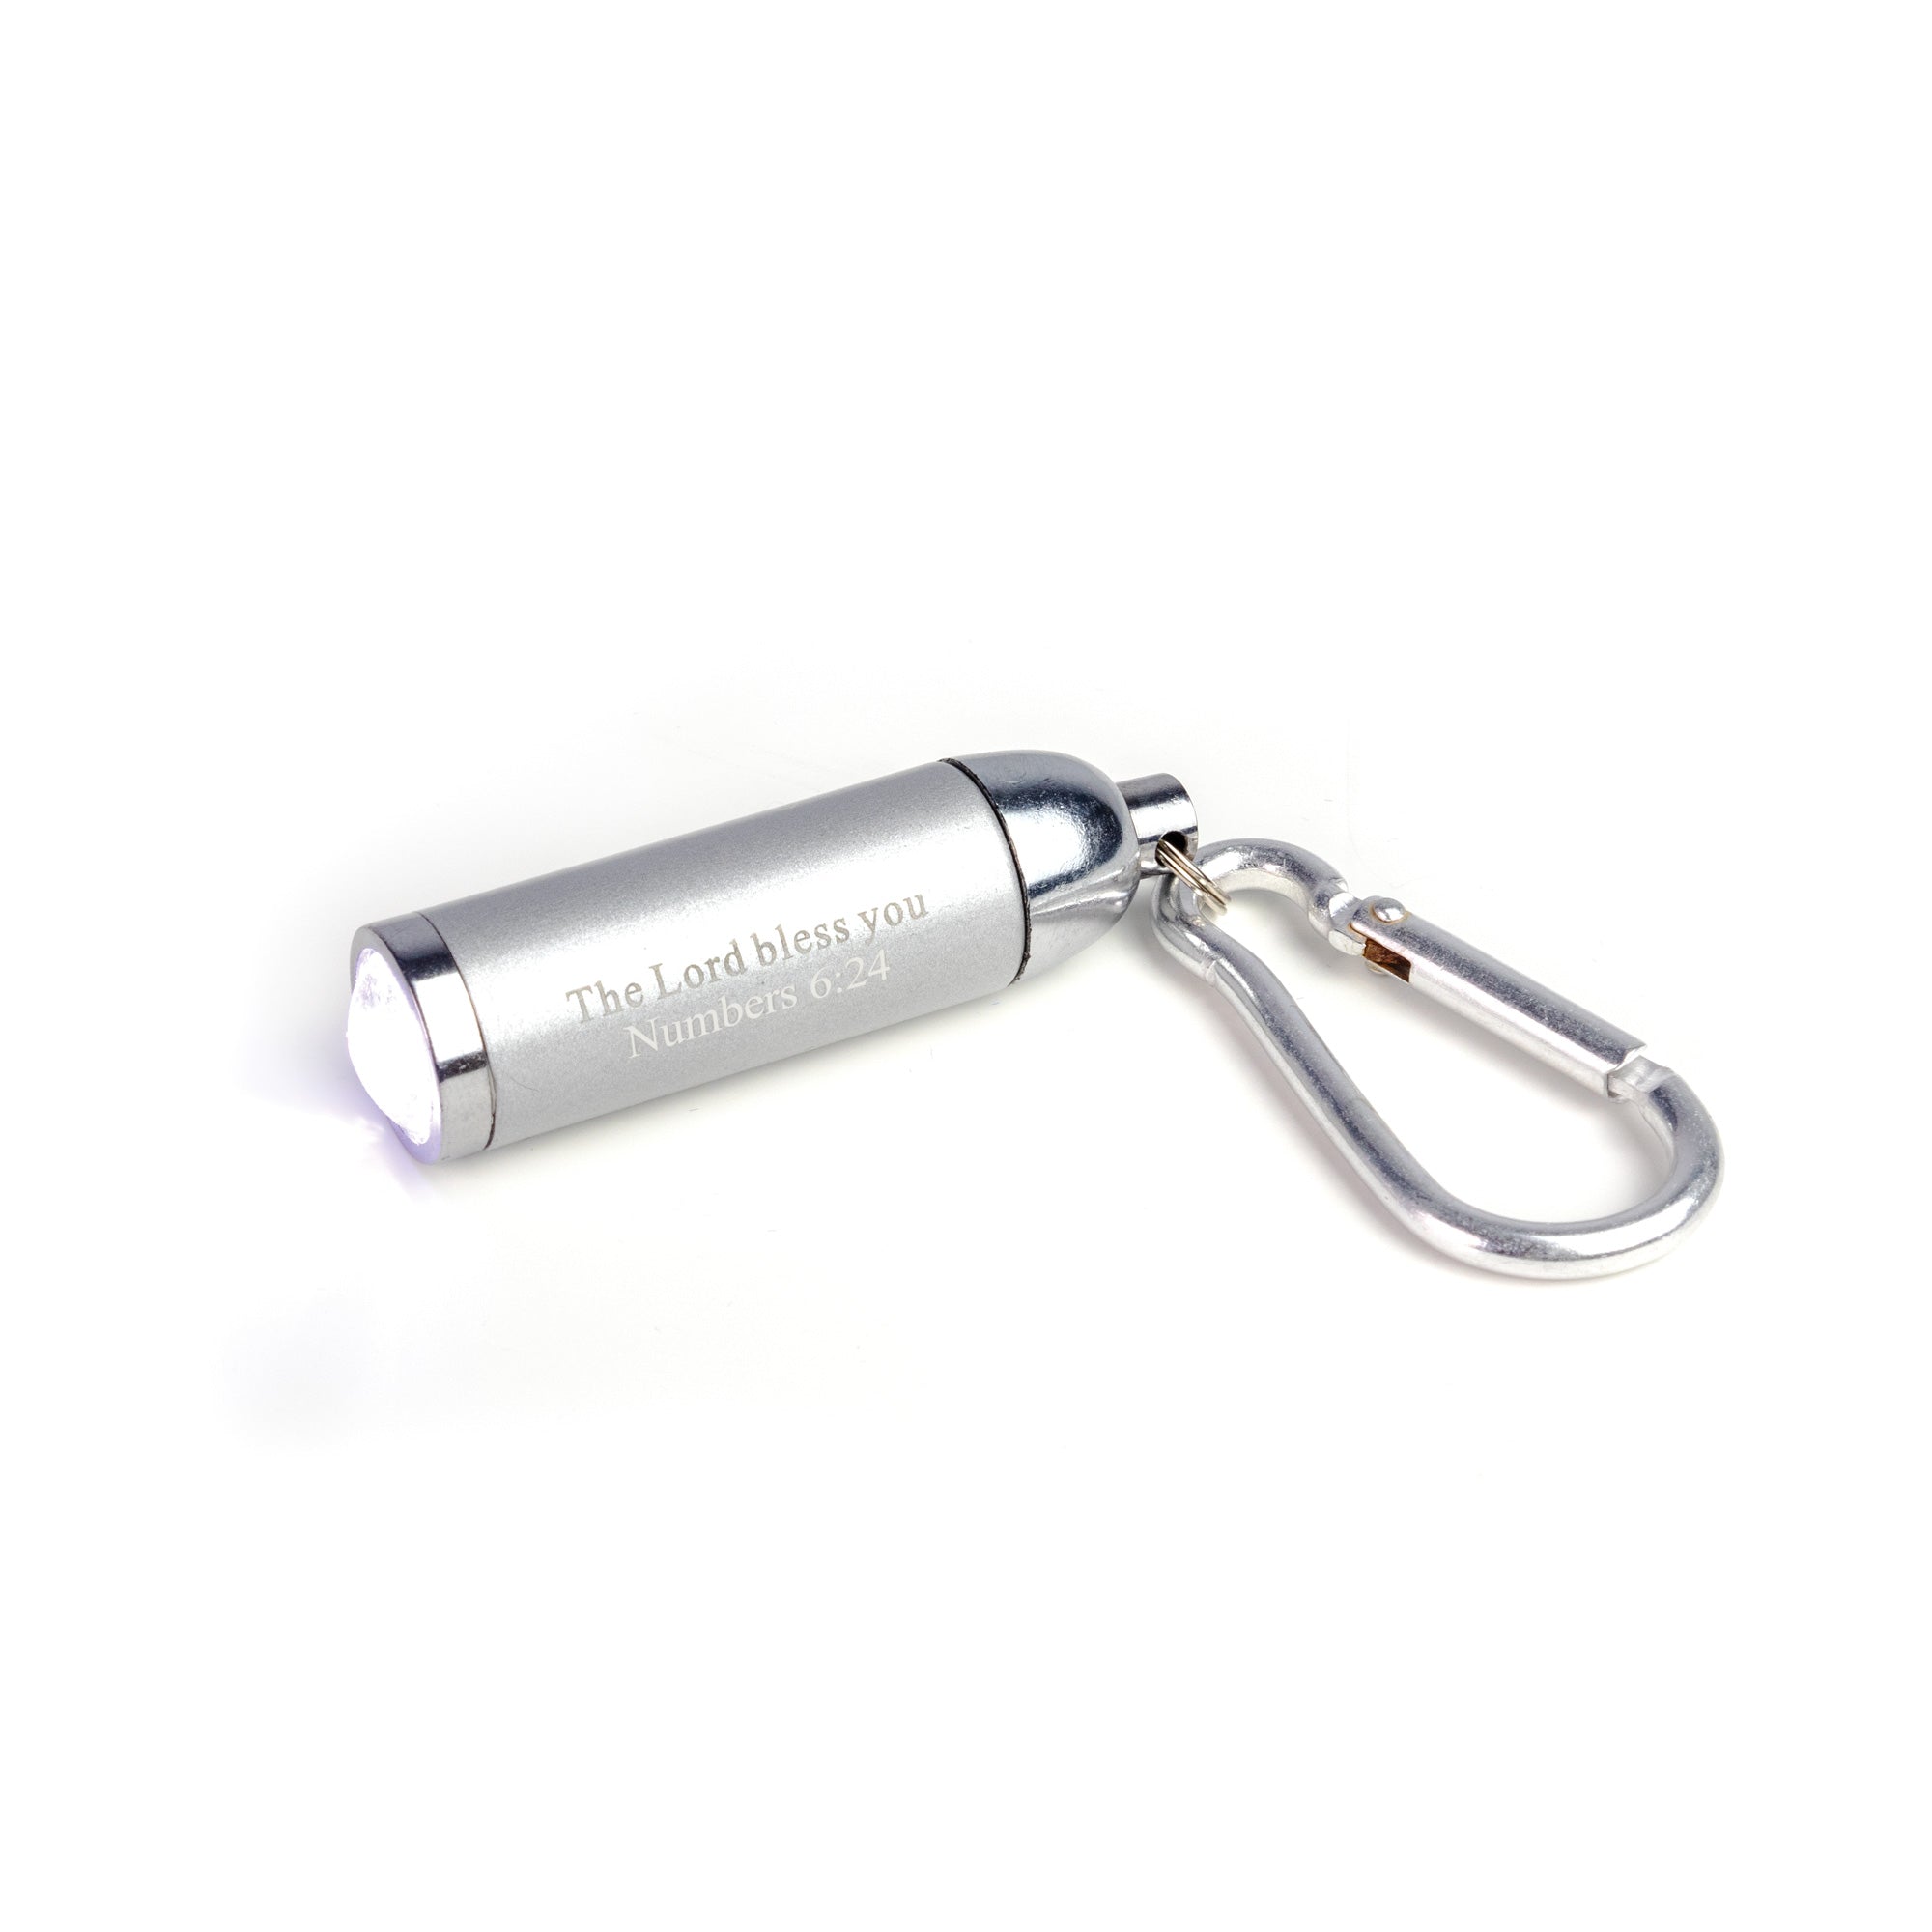 The Lord Bless You - Silver 1 LED Flashlight with Carabiner